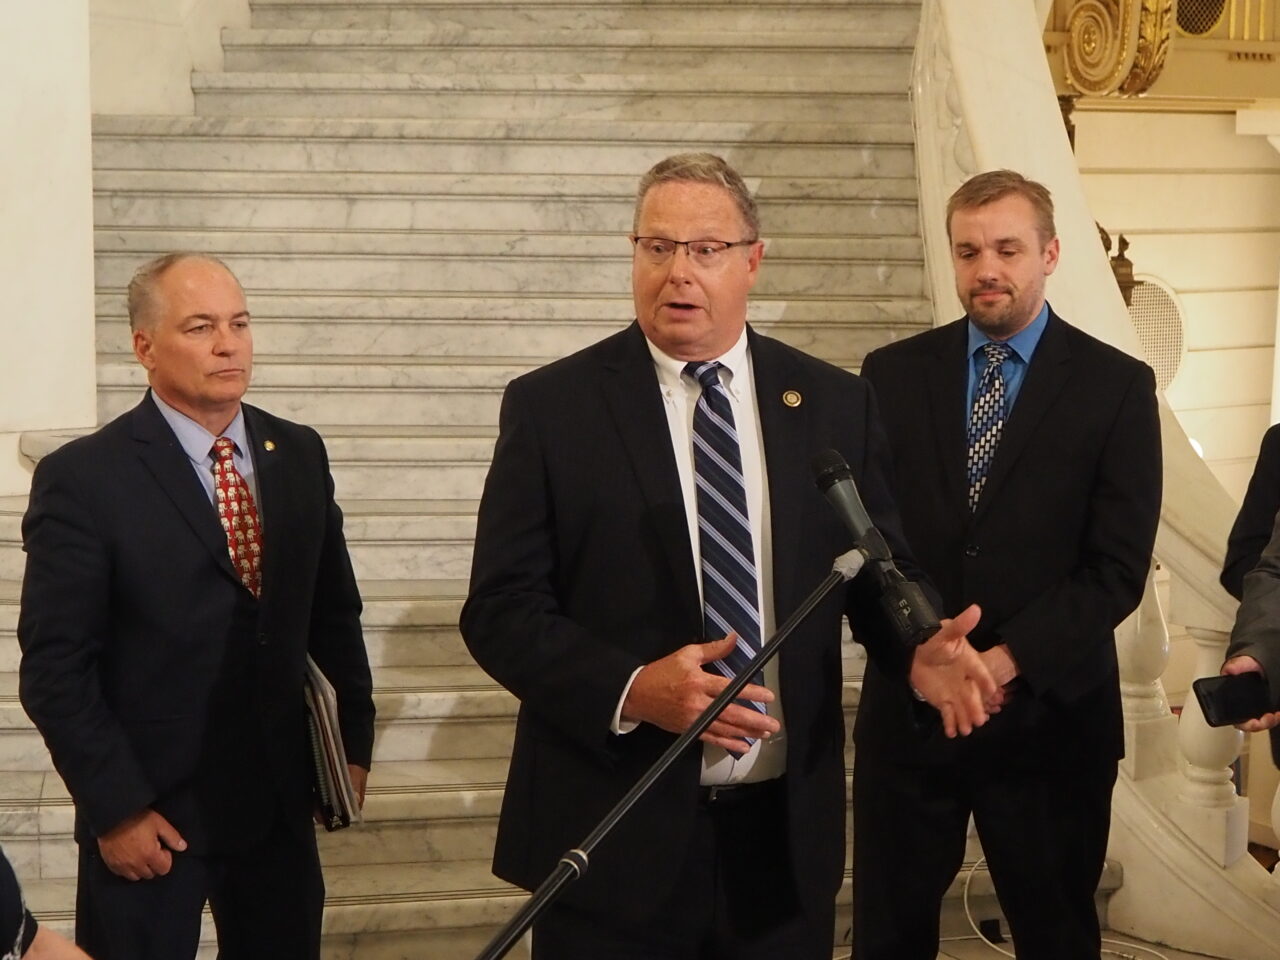 From left, House Majority Leader Kerry Benninghoff (R-Centre), Appropriations Chair Stan Saylor (R-York) and House Speaker Bryan Cutler (R-Lancaster) announce details of a $45 billion state budget deal at the state Capitol in Harrisburg on July 7, 2022.